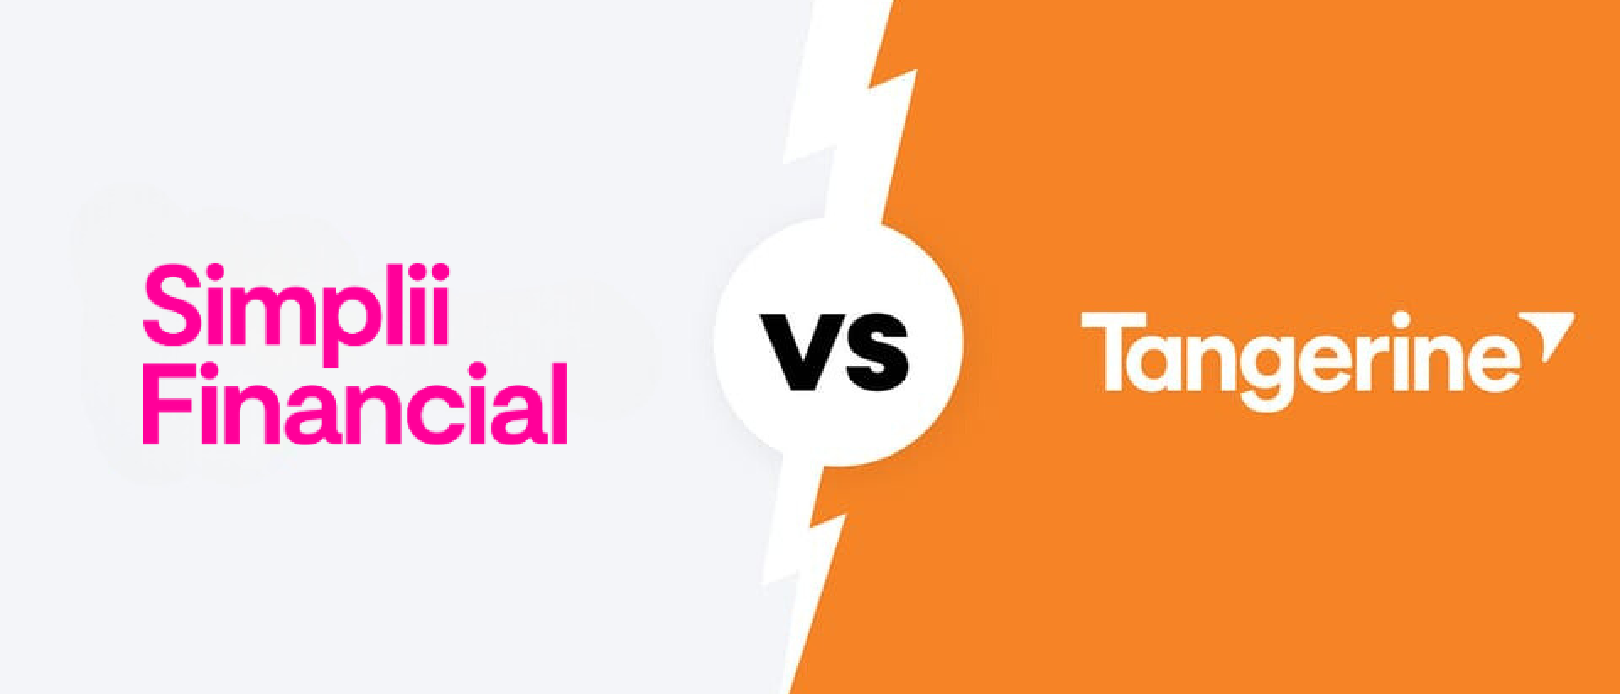 Tangerine vs. Simplii: Which bank is best for you?